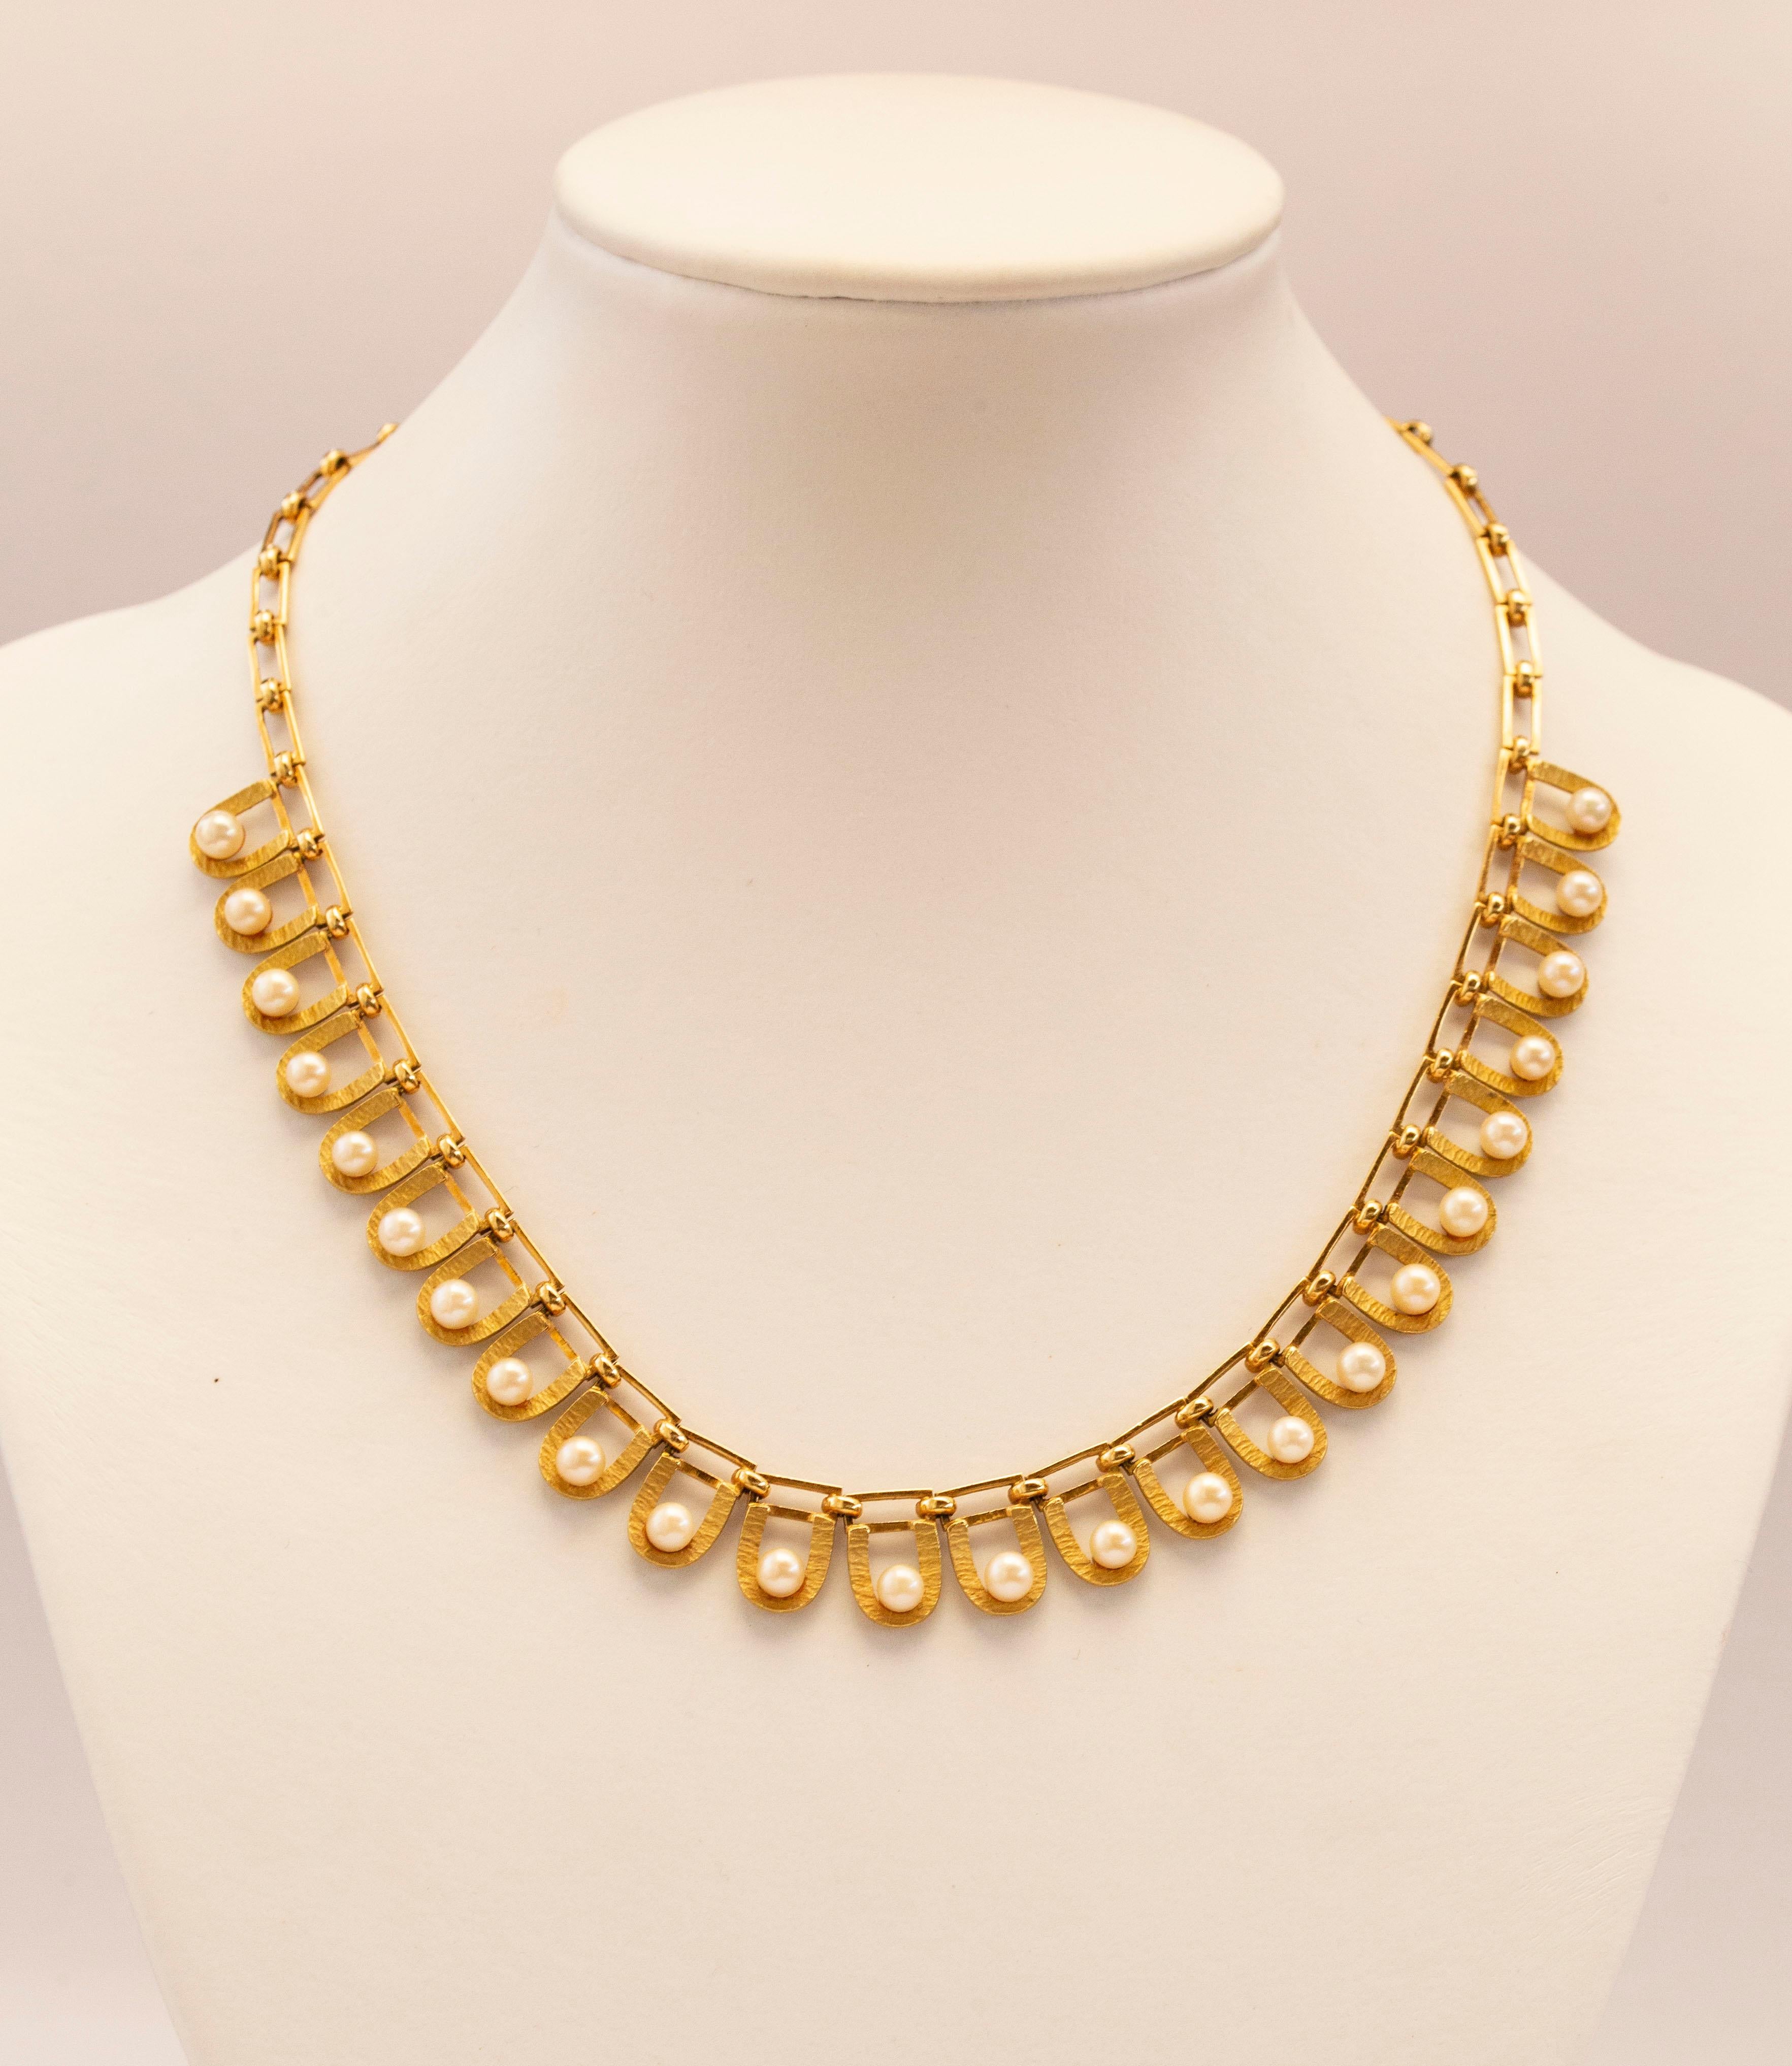 A vintage 14 karat yellow gold necklace with twenty-four cultivated Akoya pearls set individually in yellow gold matt and textured links in a form of a horseshoe that are attached to rectangular links made of yellow shiny gold. The necklace has a